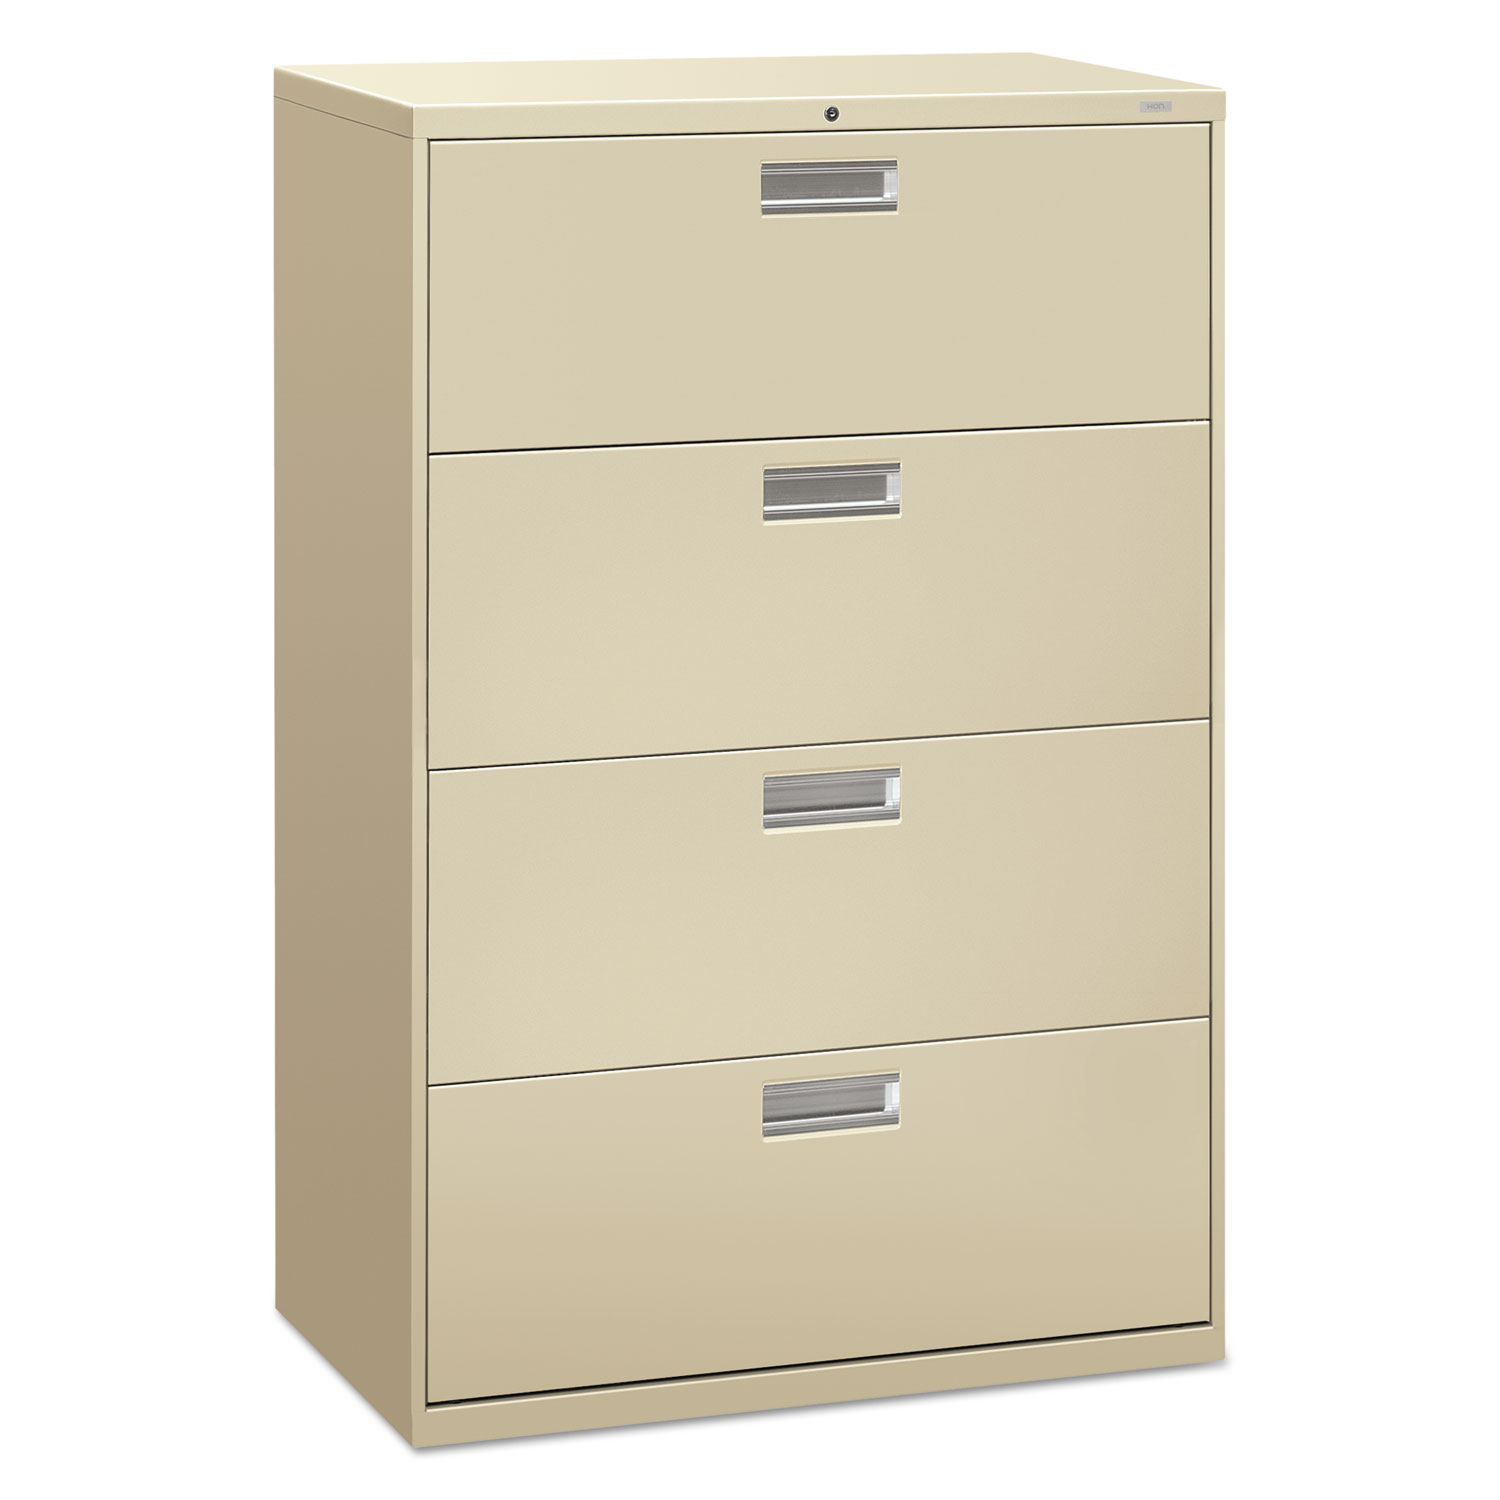 HON 600 Series Four-Drawer Lateral File, 36w x 19-1/4d, Putty